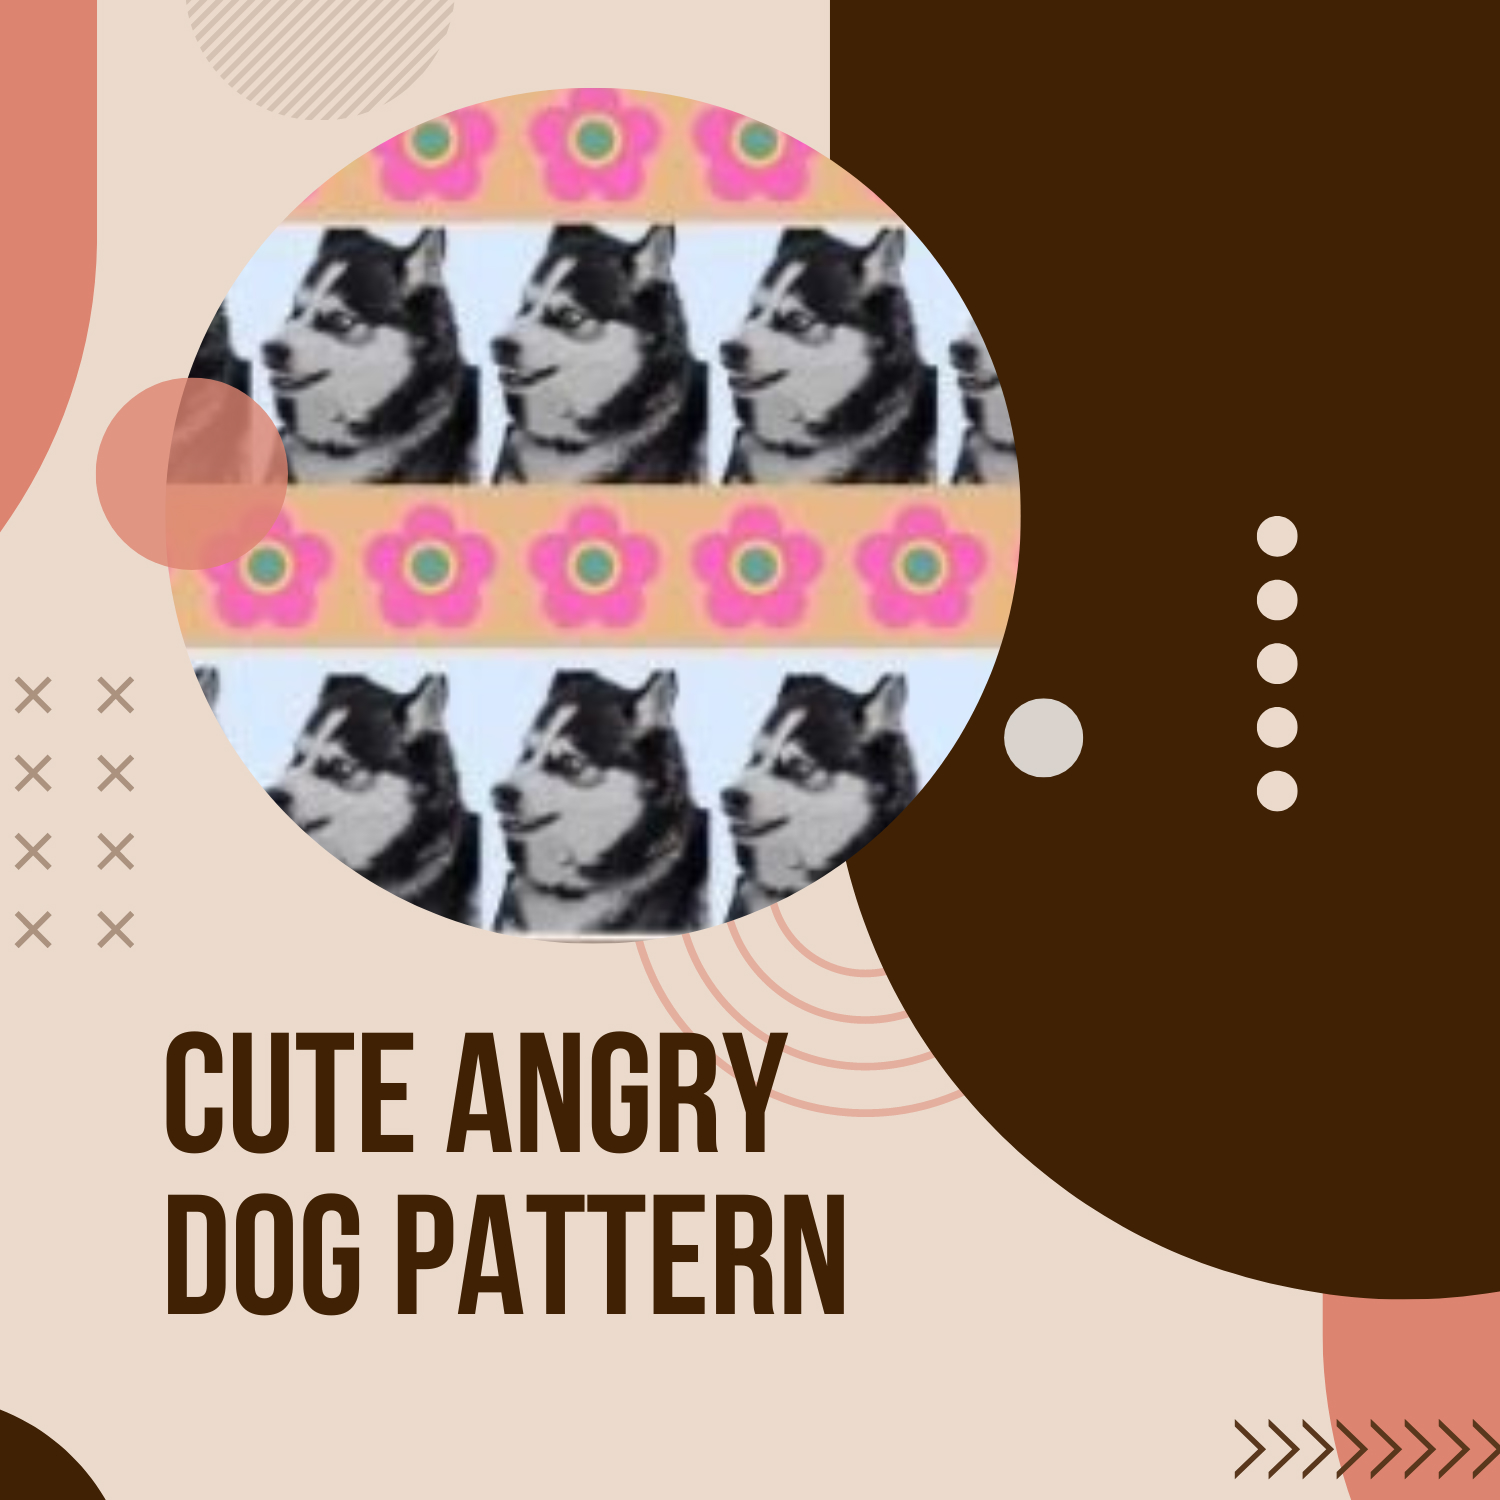 Cute Angry Dog Pattern/Background.